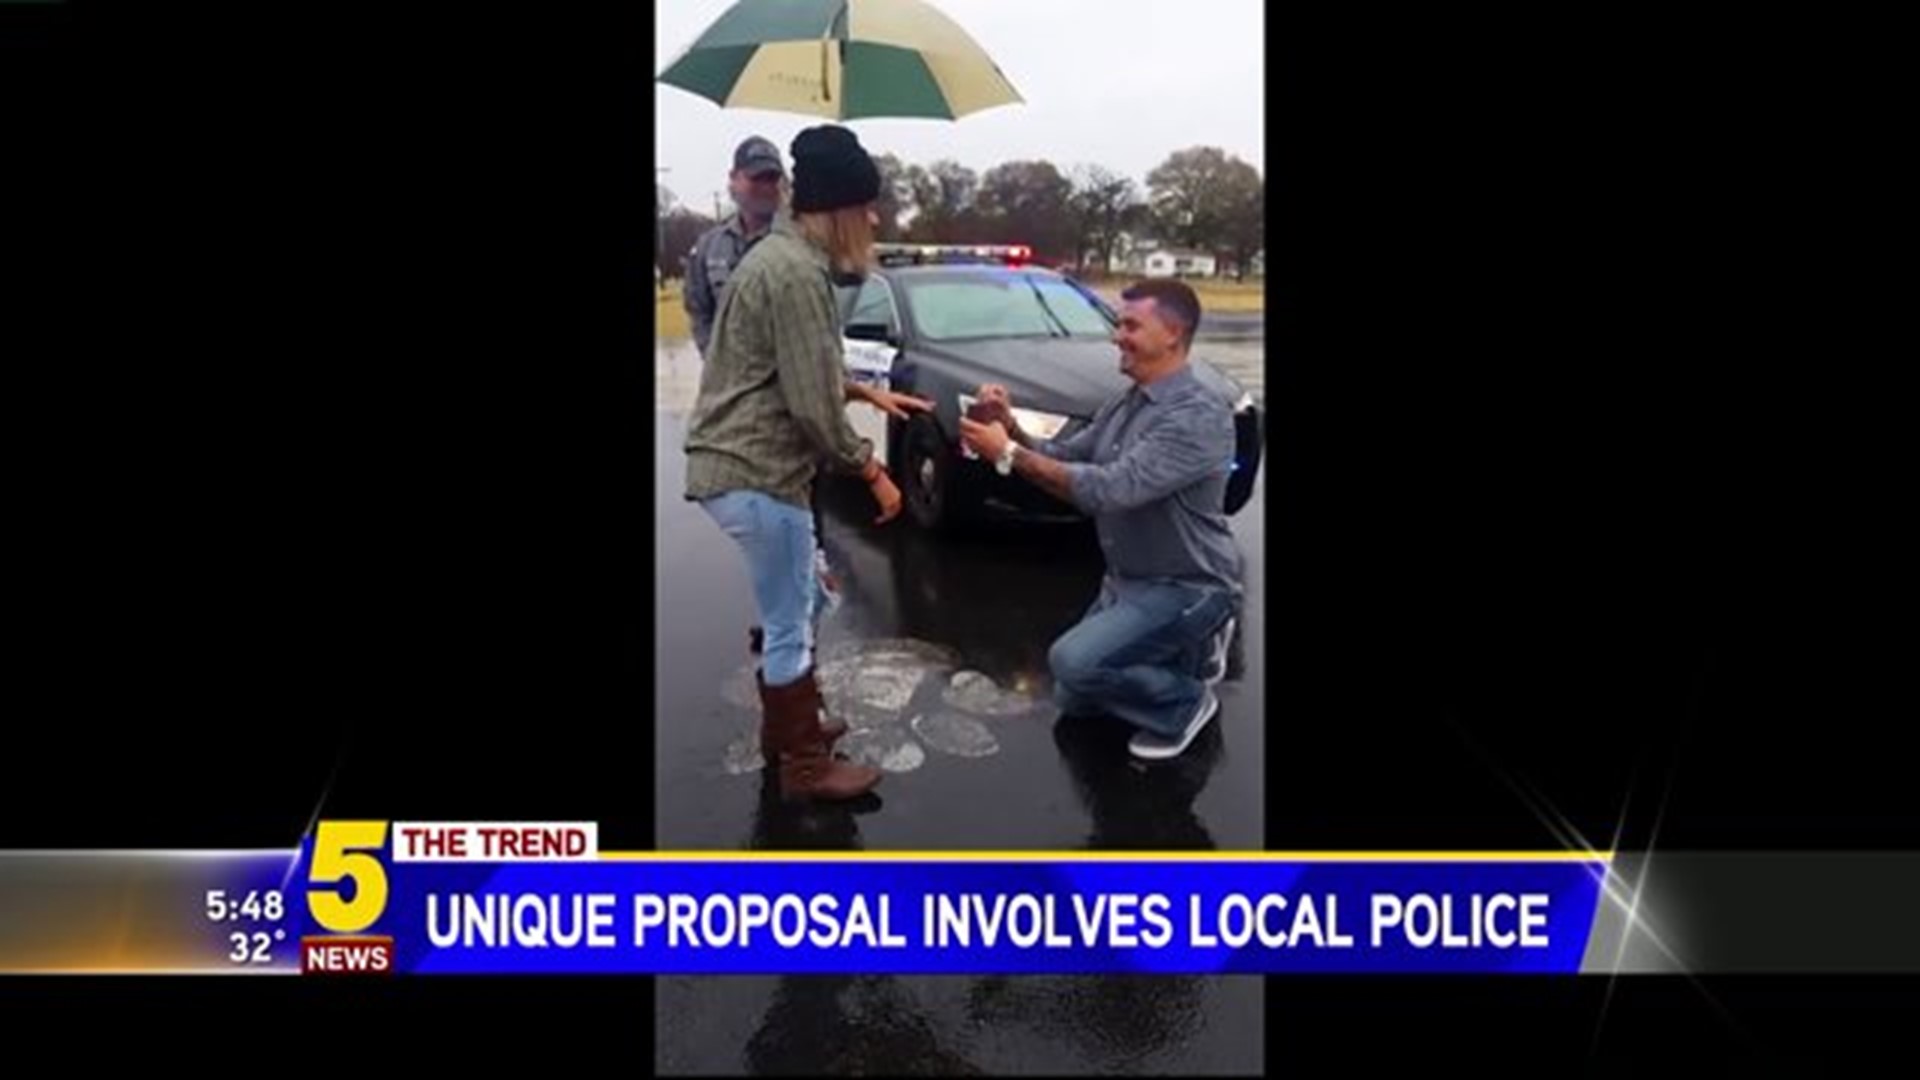 POLICE PROPOSAL